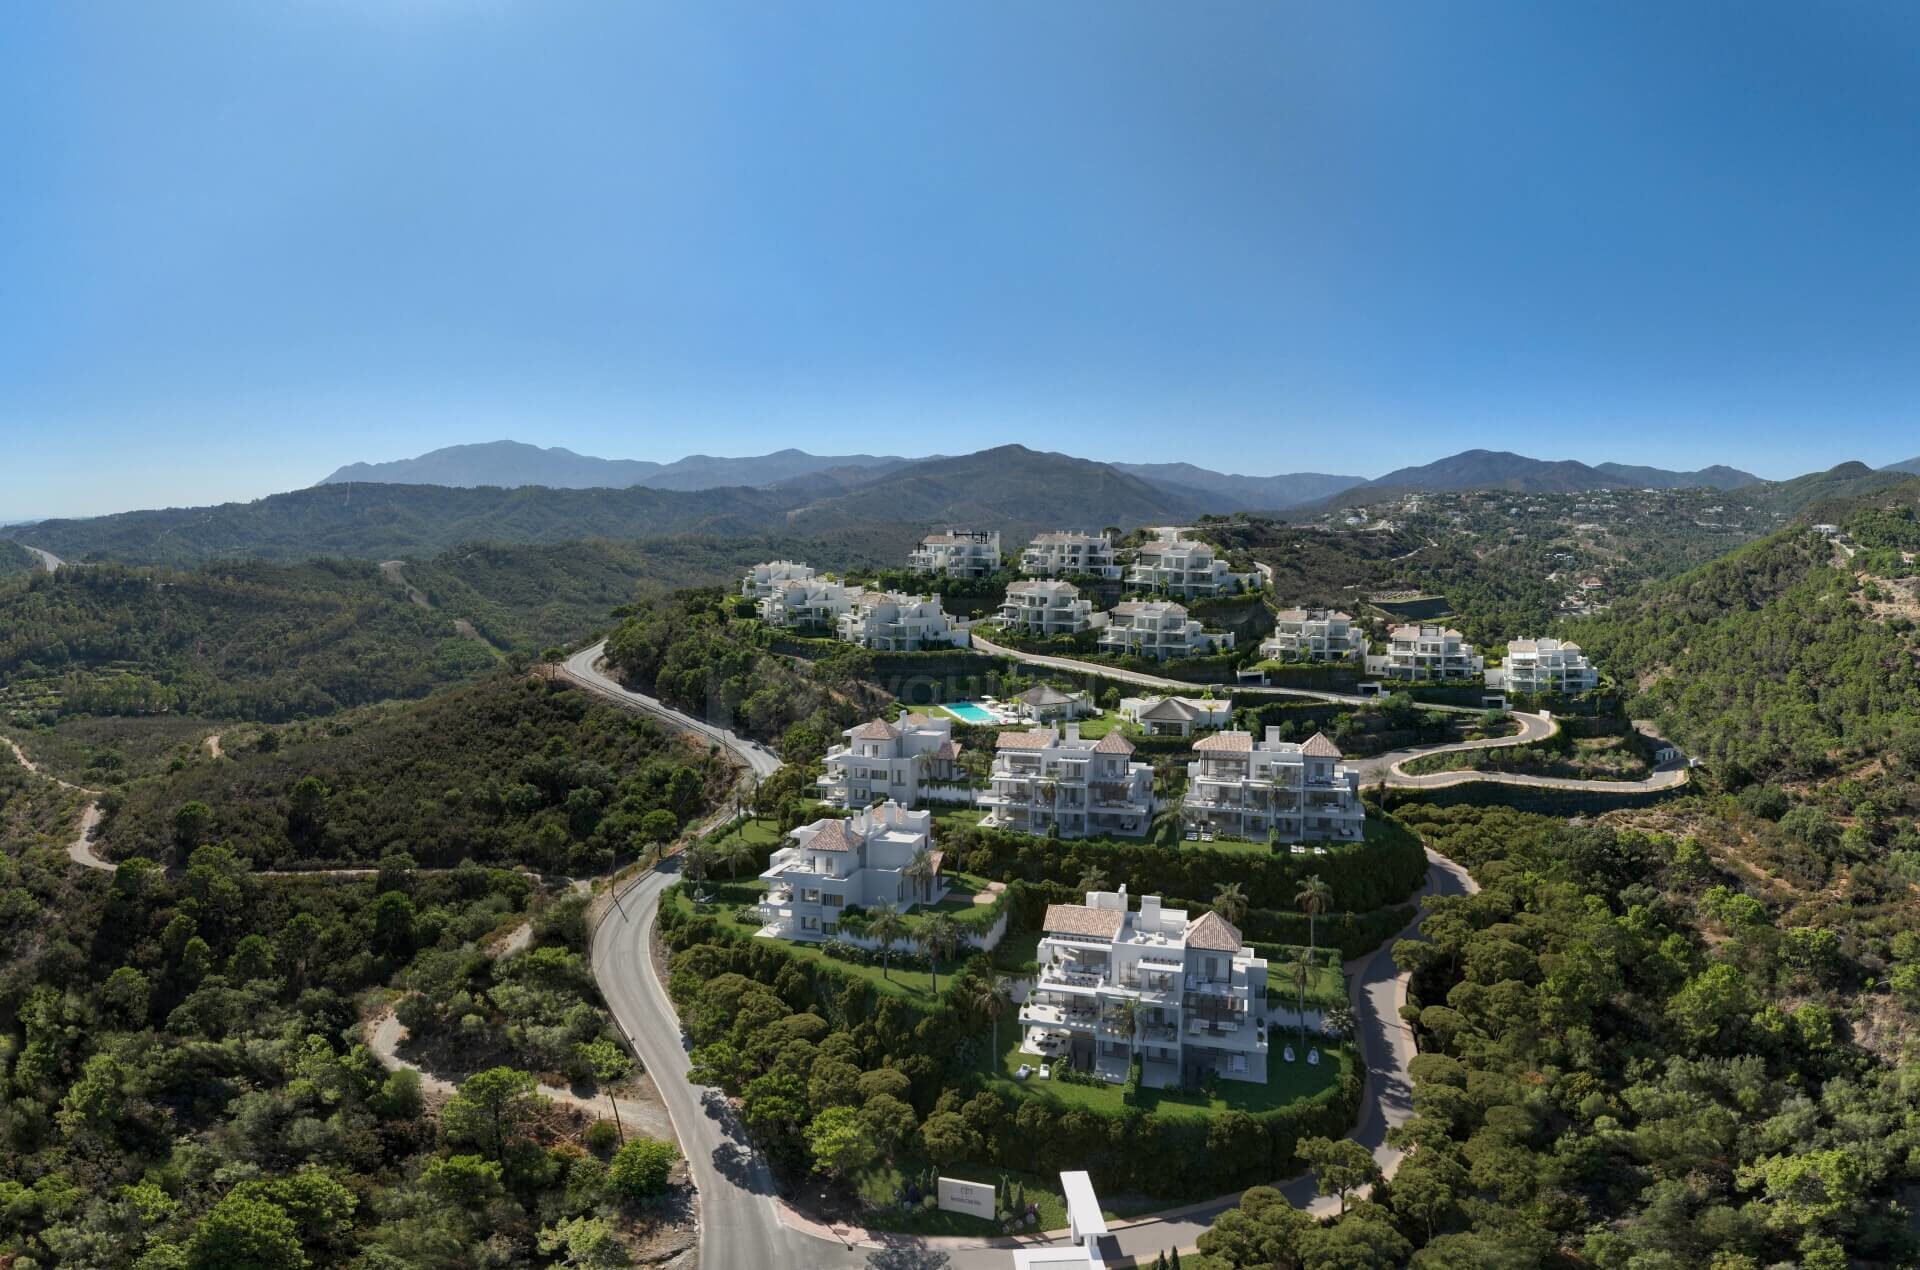 The project of Marbella Club Hills